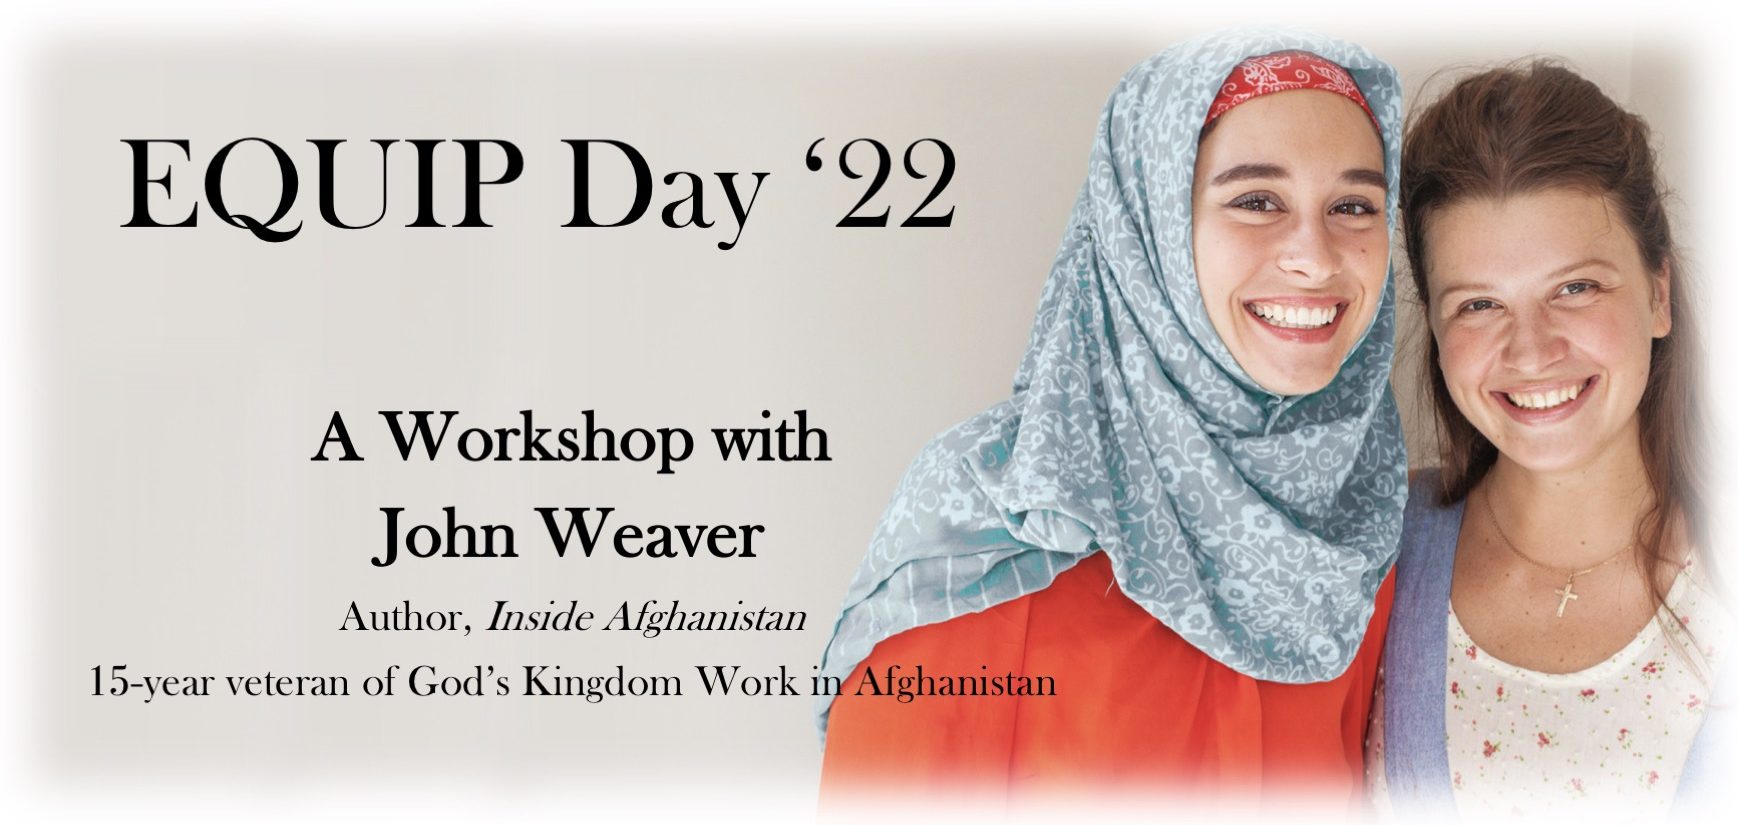 EQUIP Day '22: A Workshop with John Weaver, author of Inside Afghanistan and 15-year veteran of God's Kingdom Work in Afghanistan